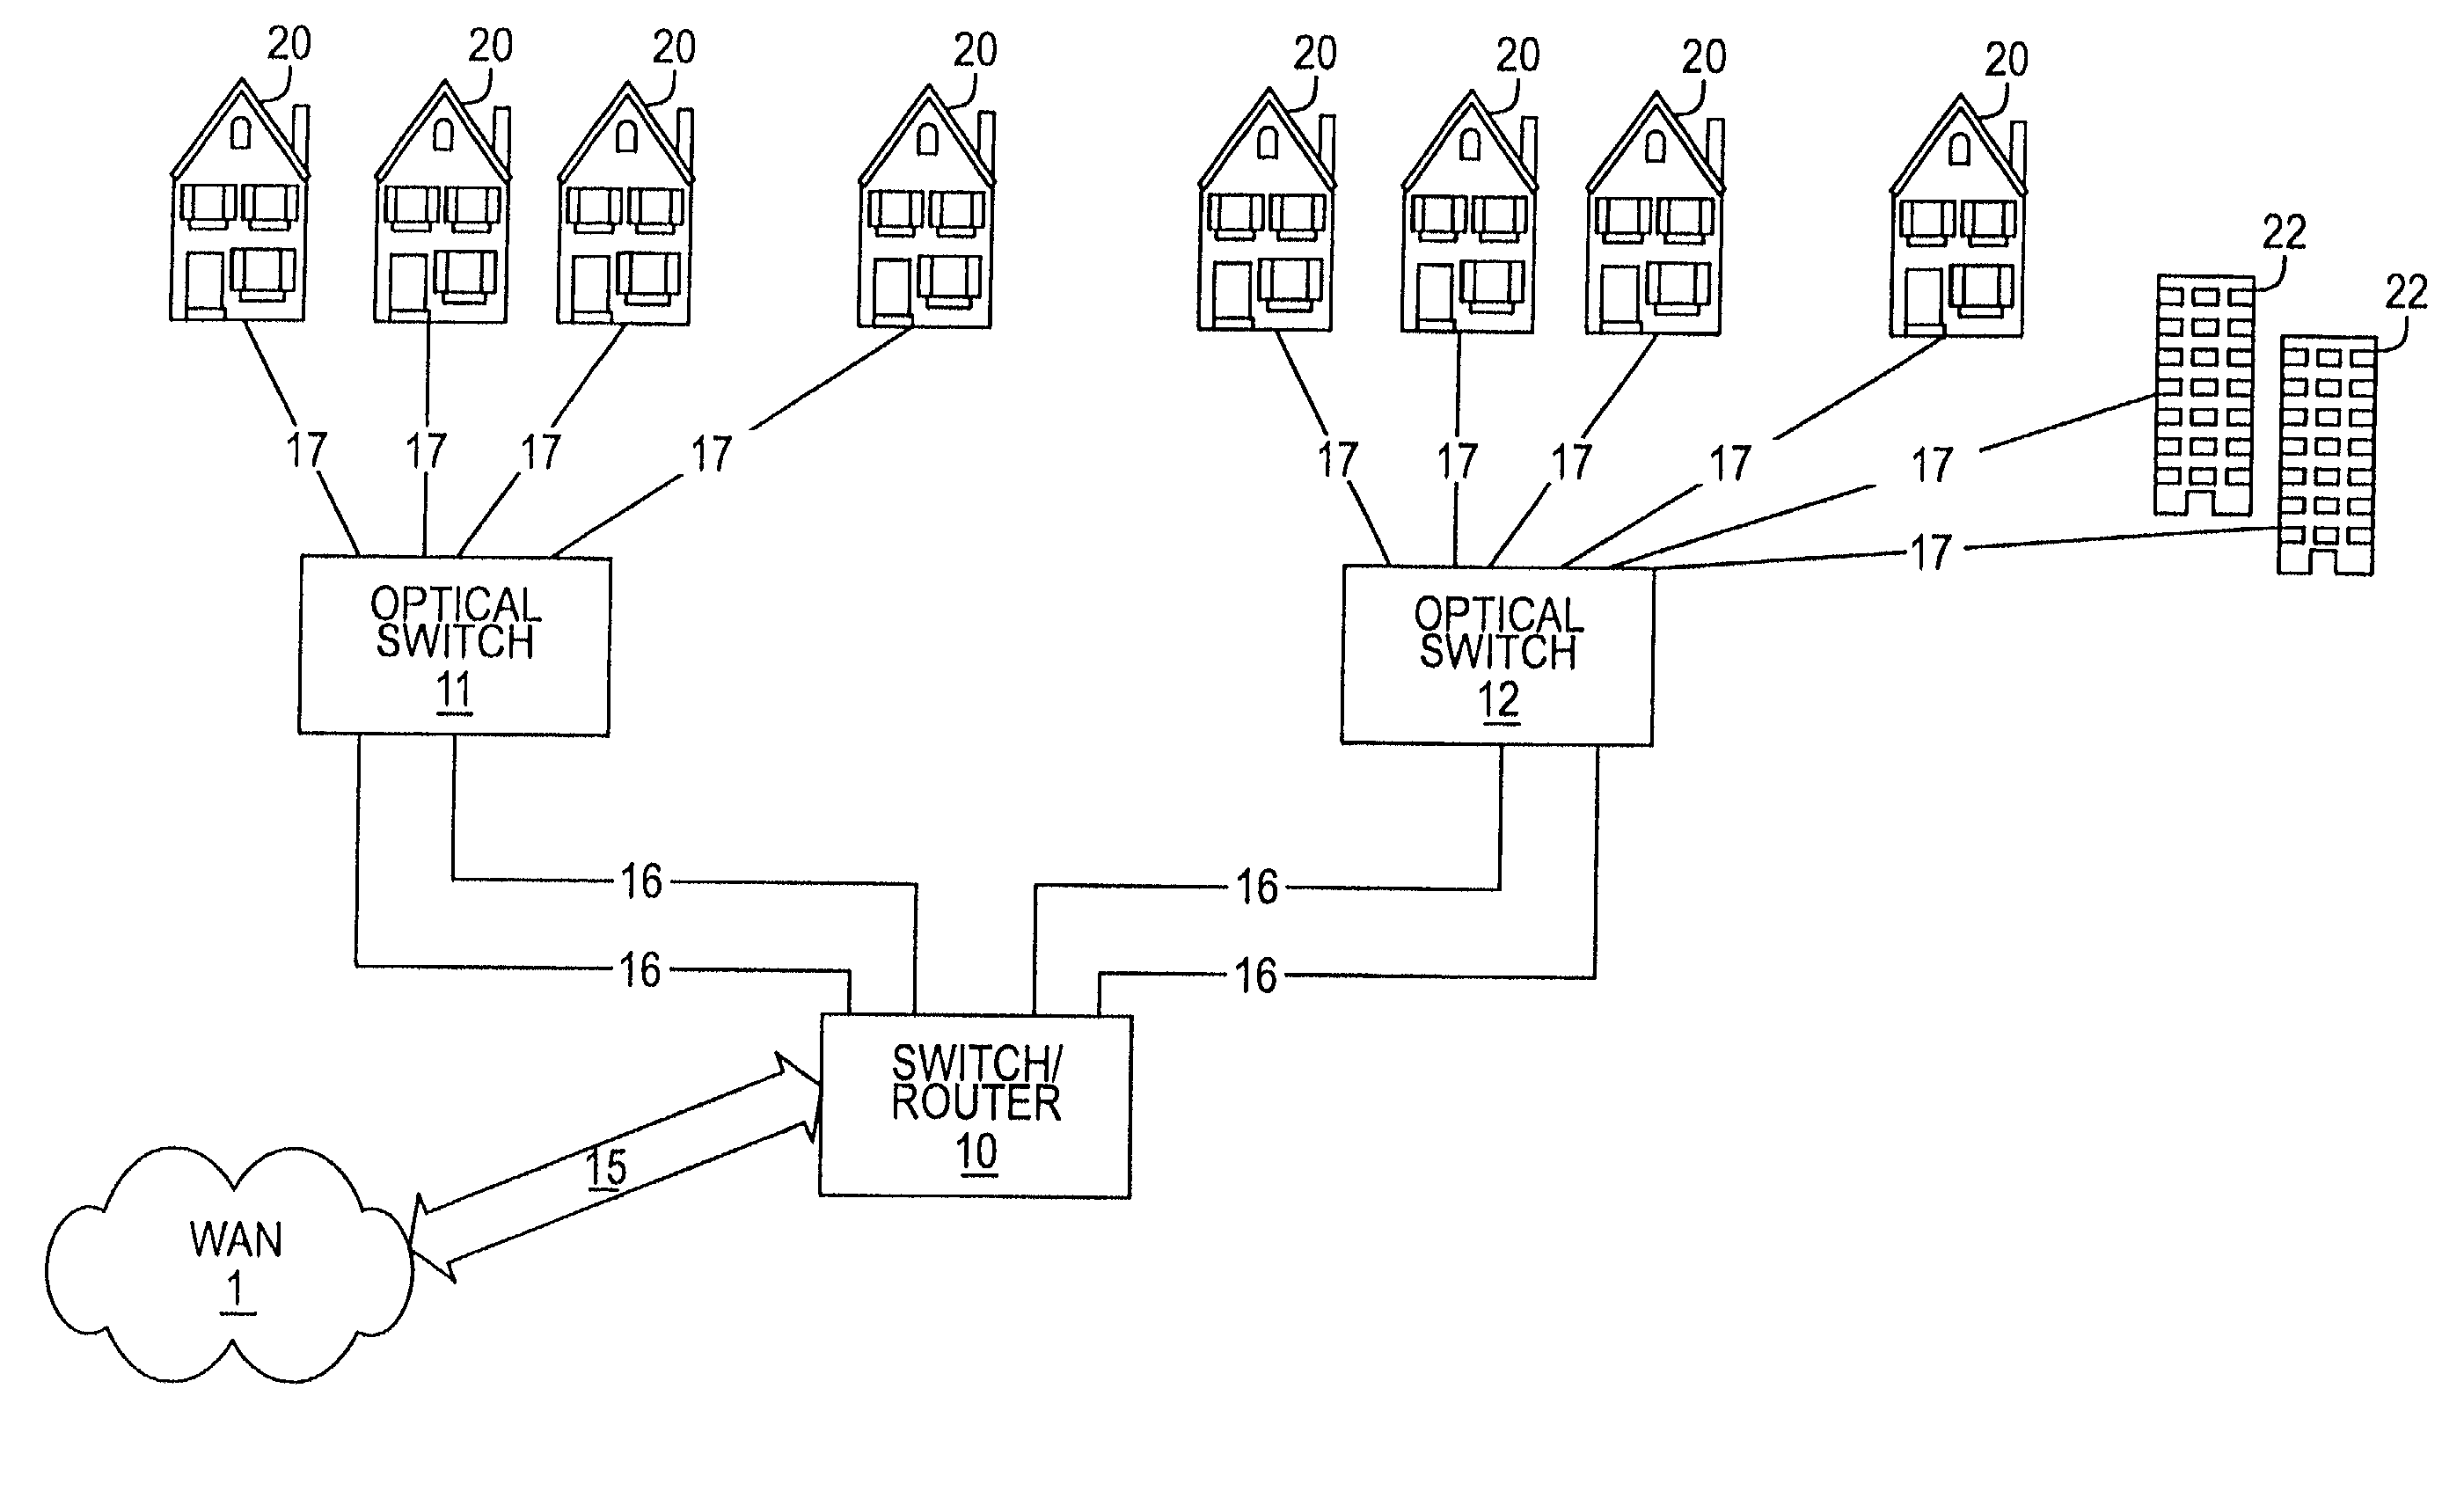 Optical network subscriber access architecture